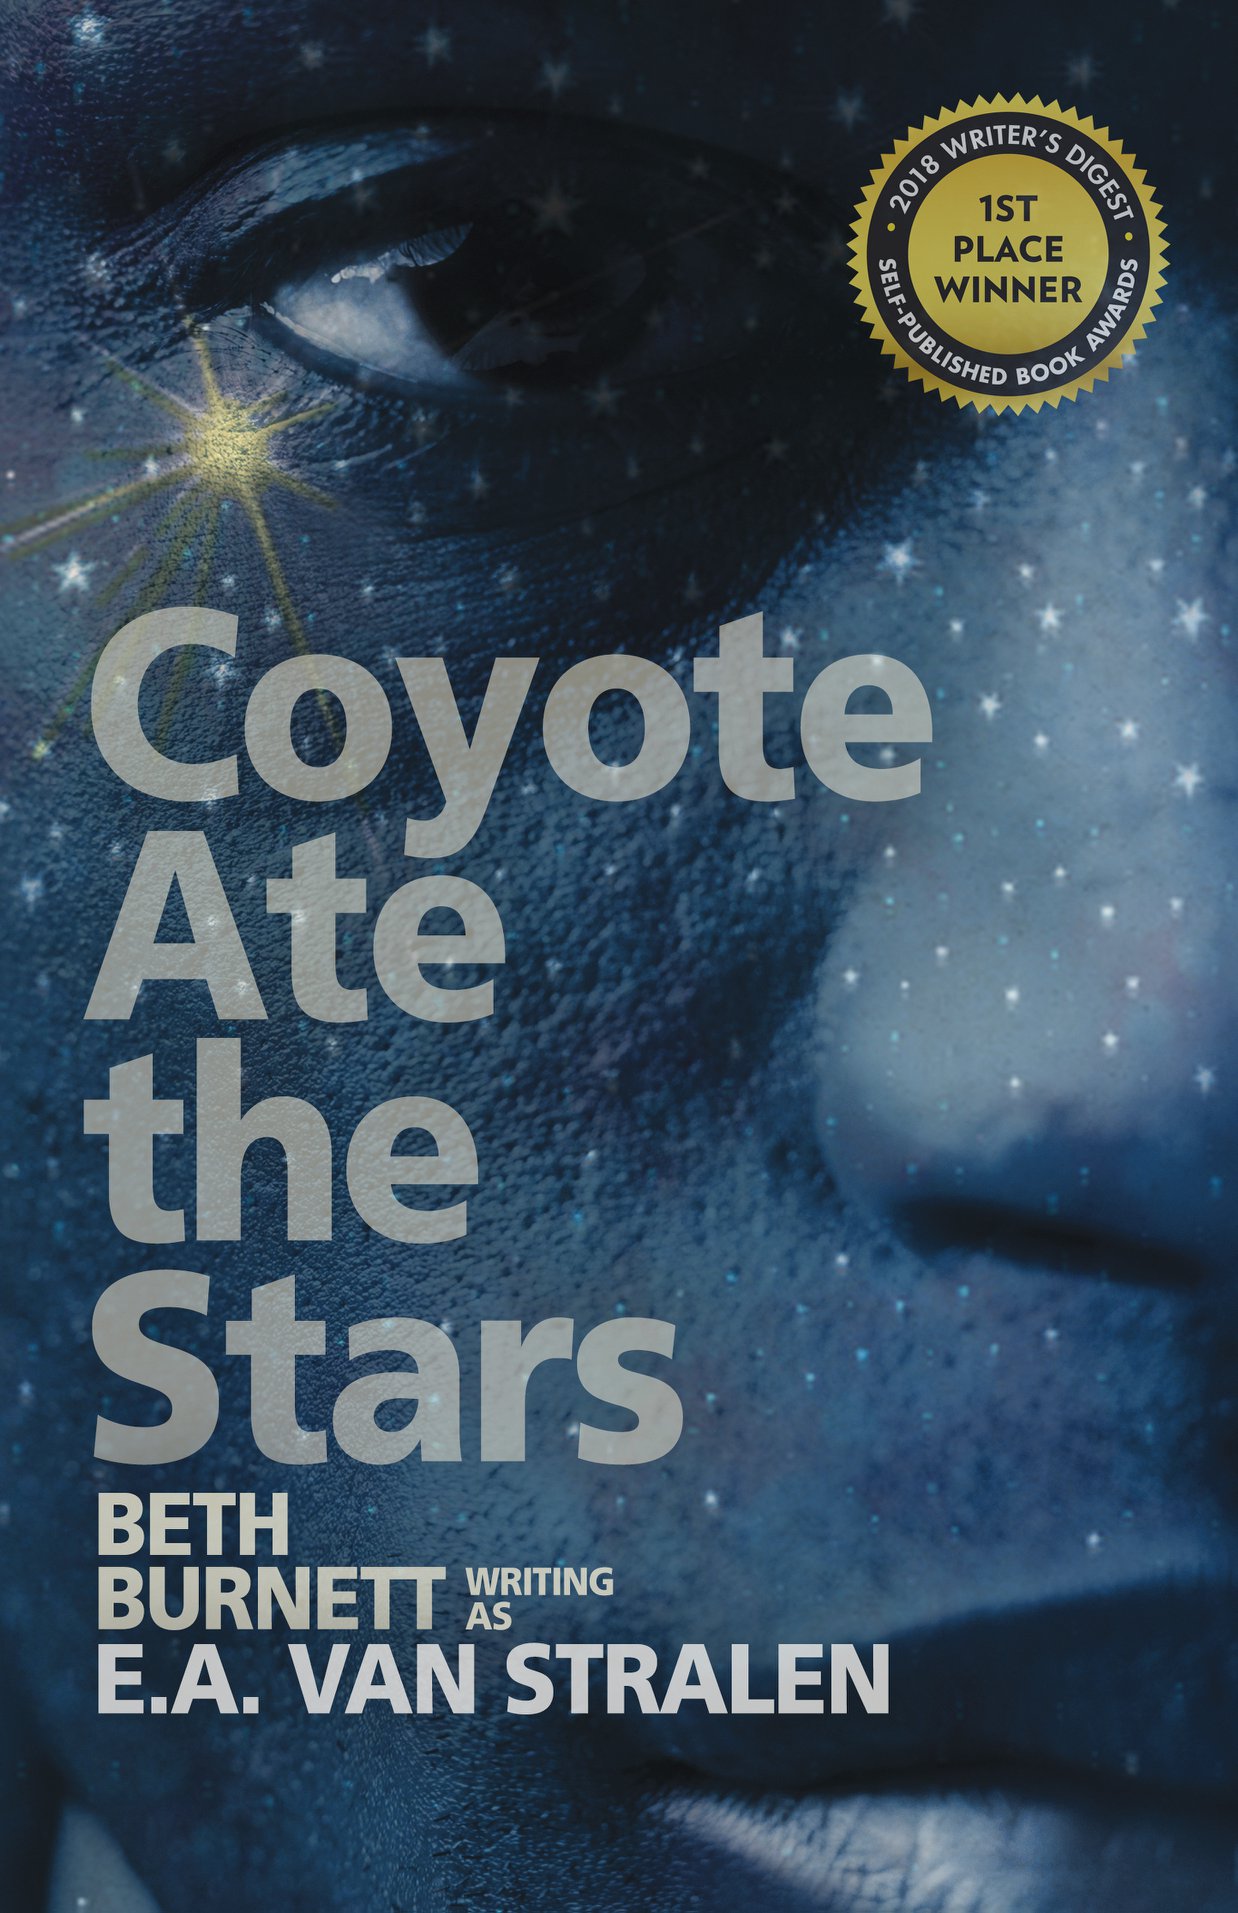 Coyote Ate the Stars (content/copyediting)